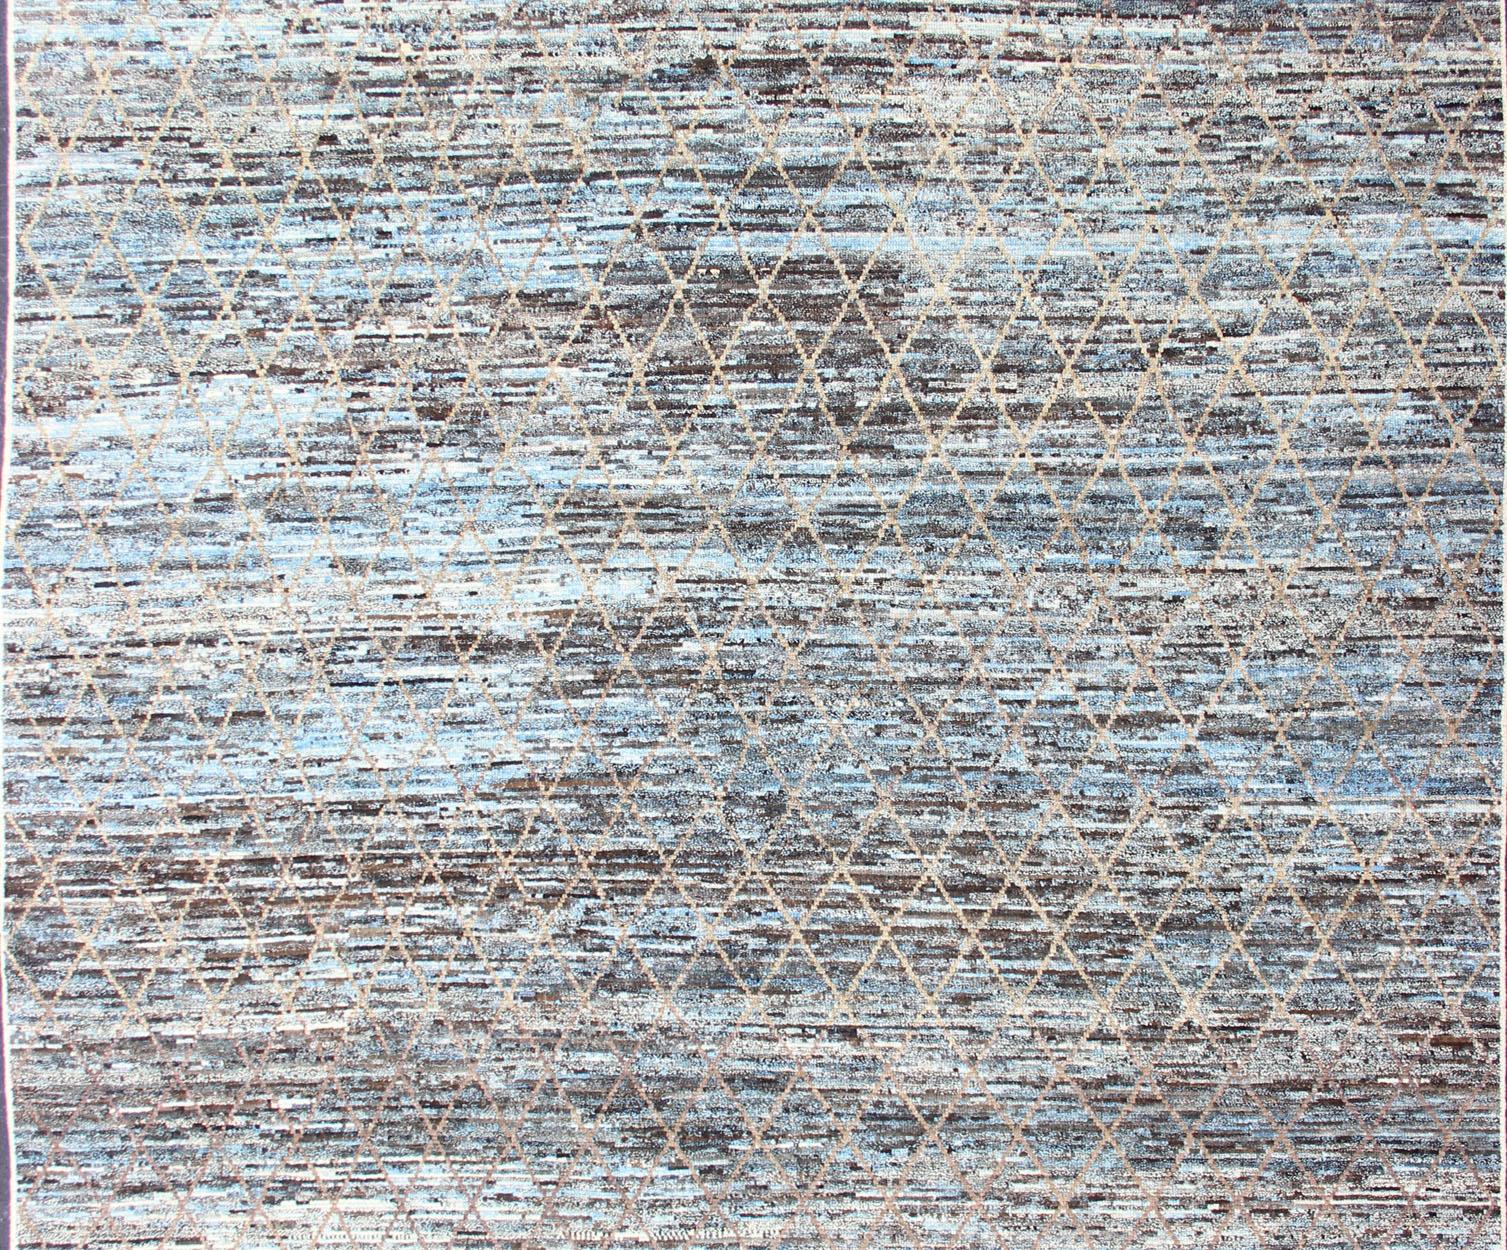 Hand-Knotted Modern Casual Design Rug in Blue, Gray, Charcoal, Brown and Neutral Tones